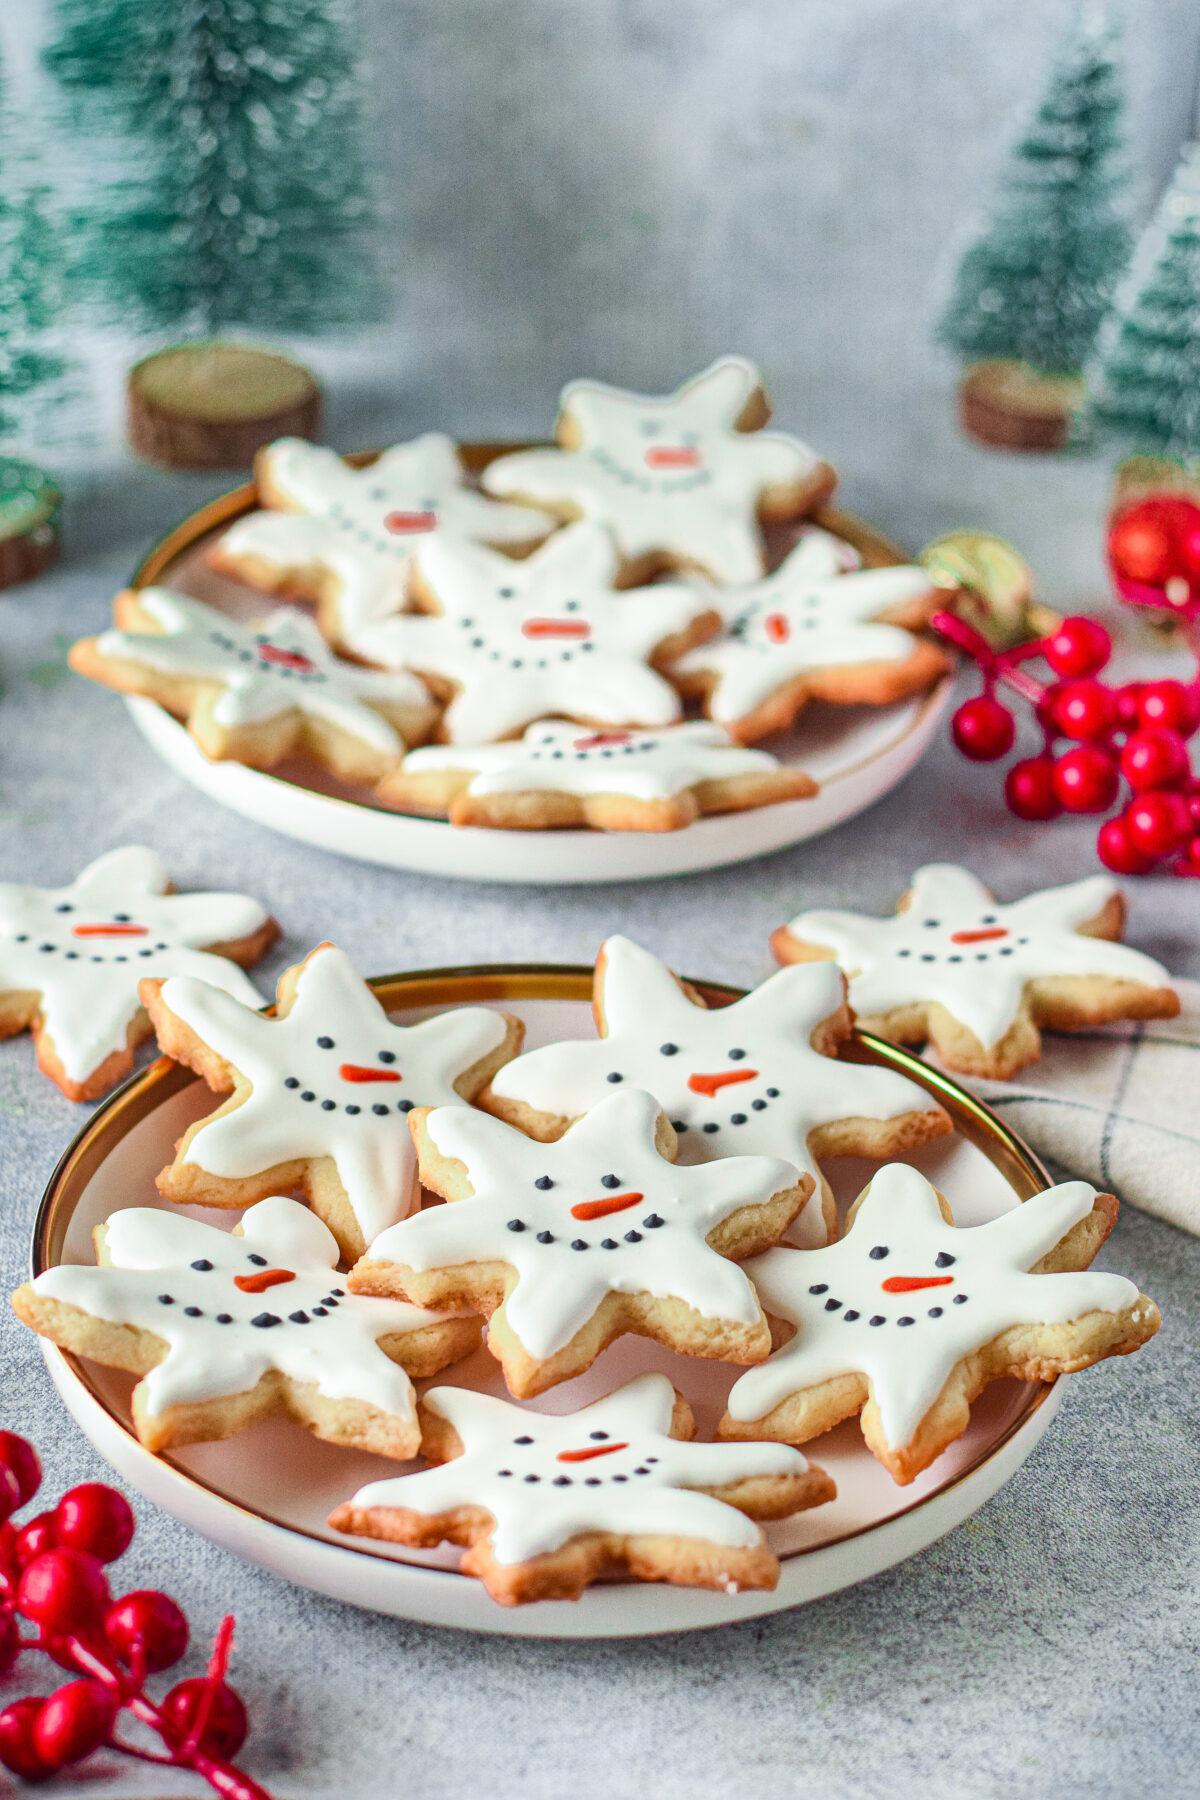 These adorable snowman snowflake cookies are perfect for the holidays! They are a festive addition for your Christmas cookie platter.